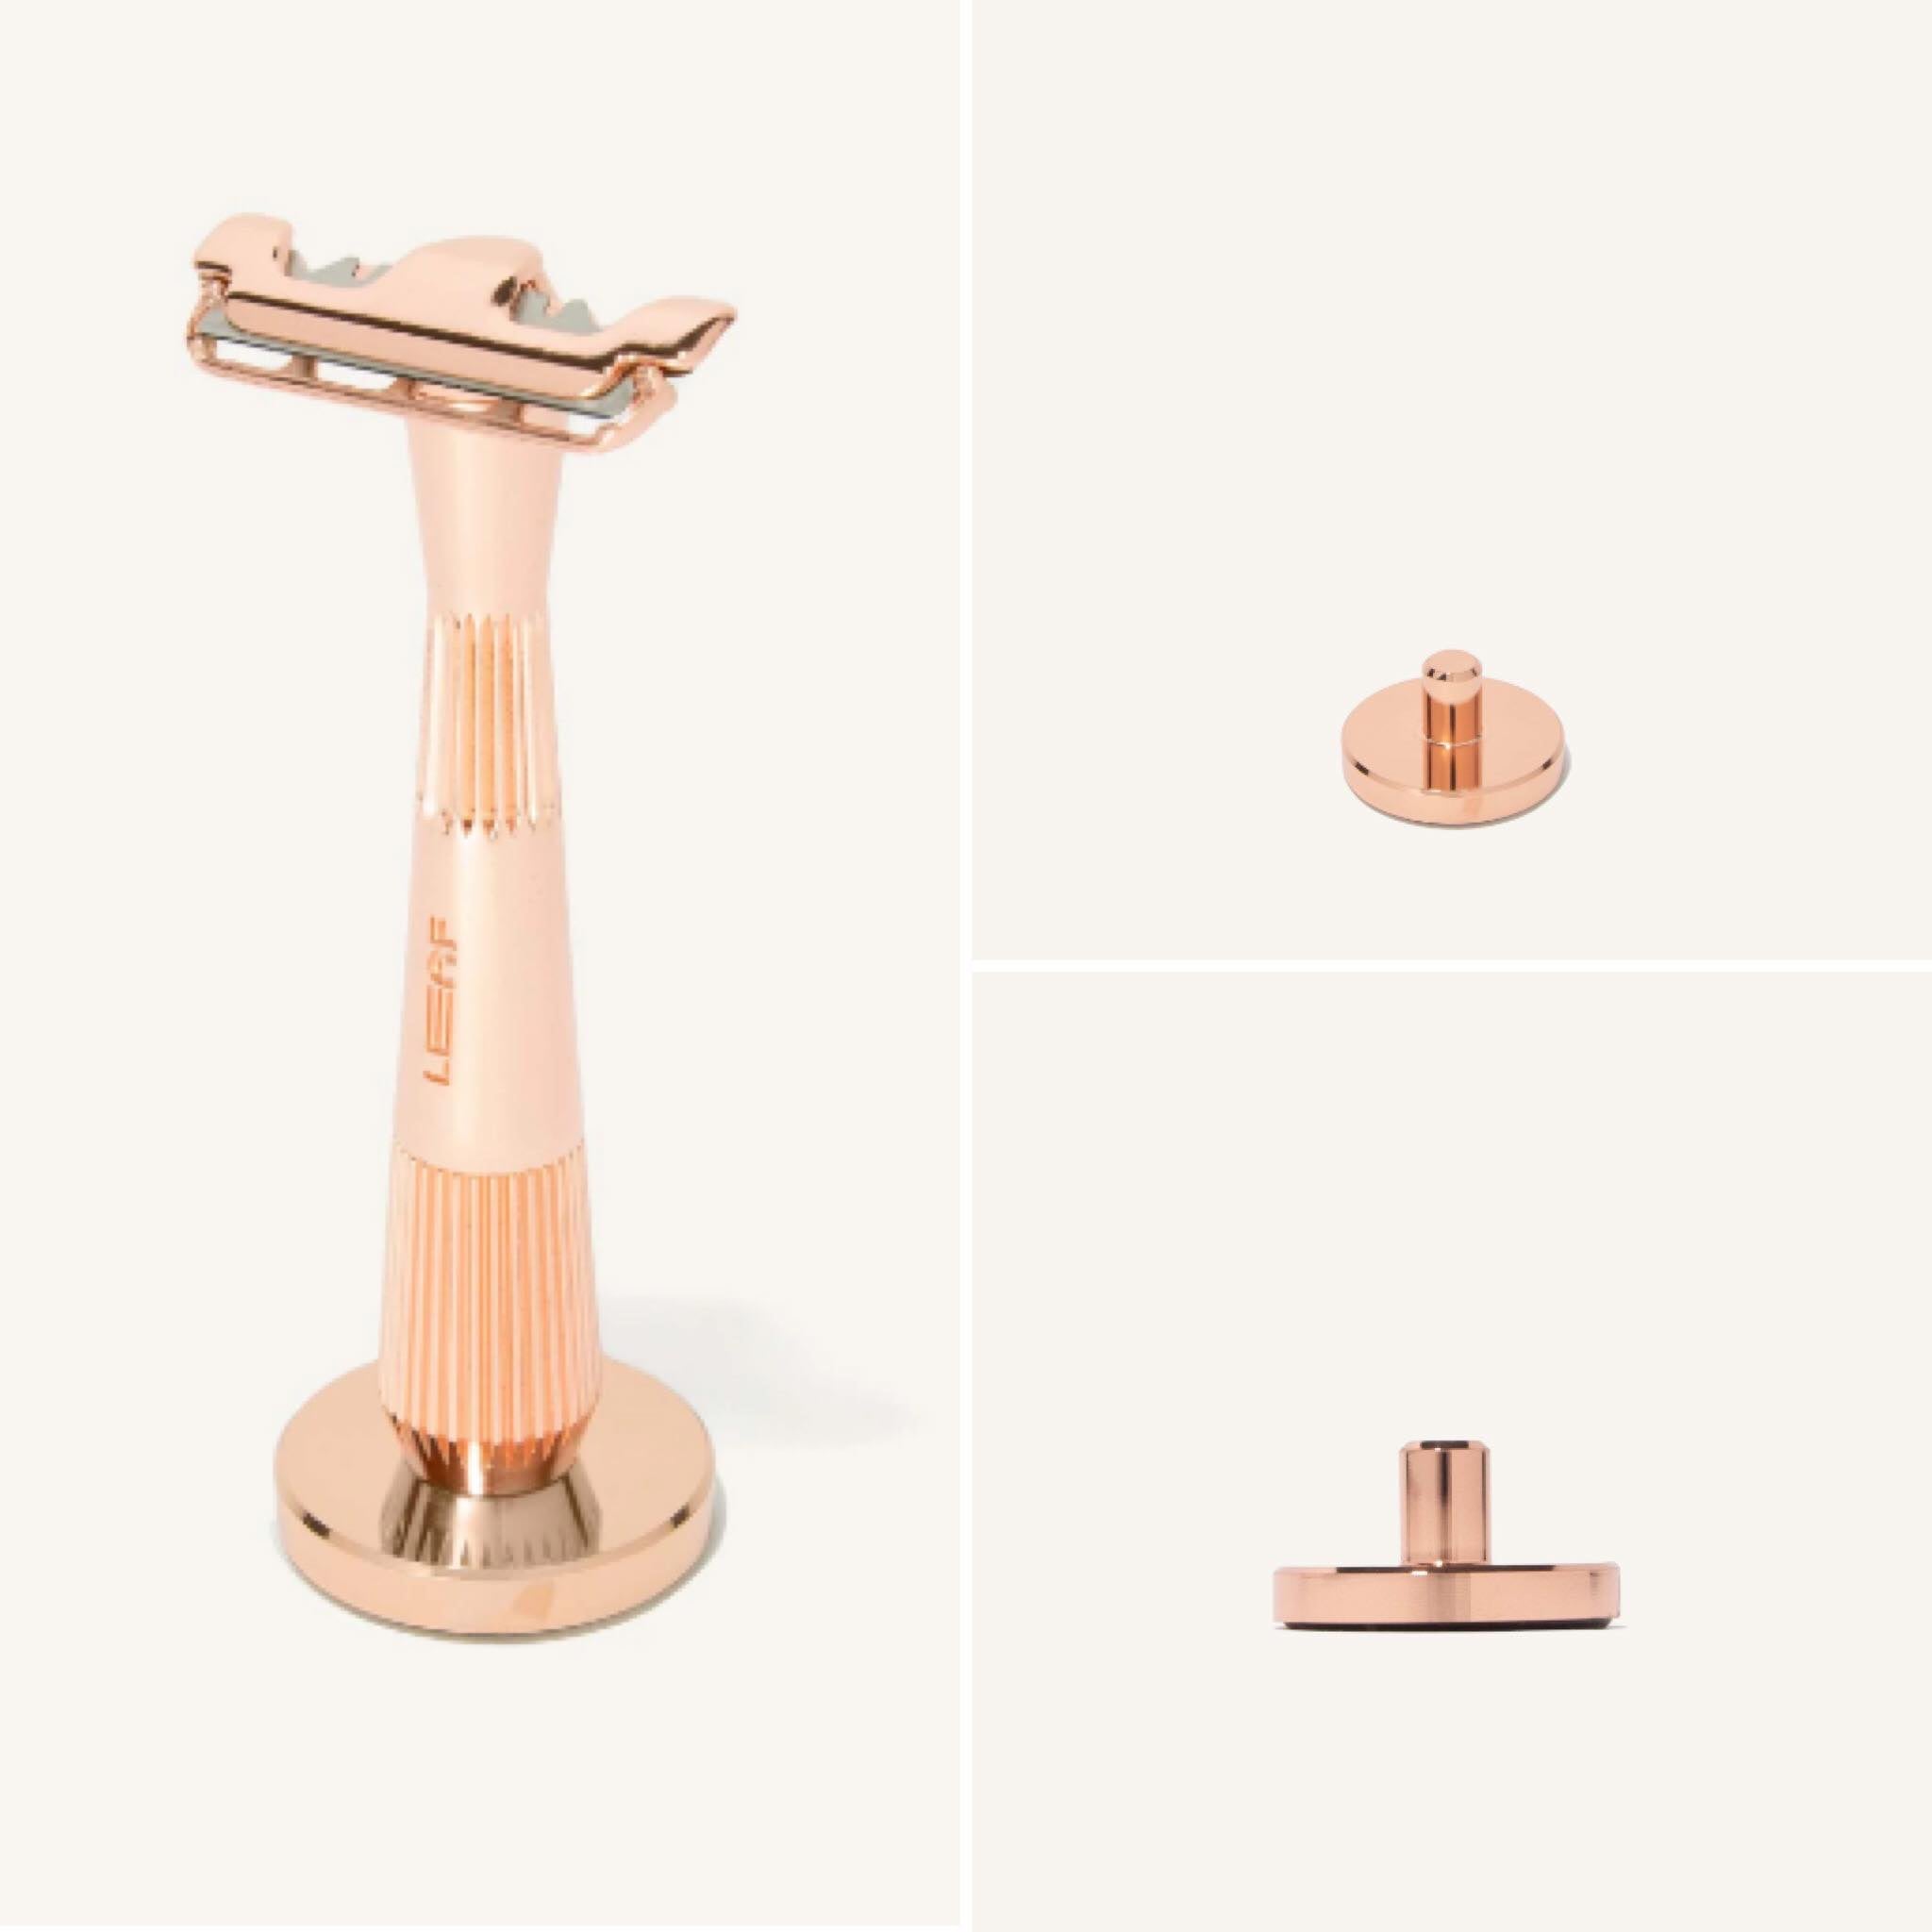 Display your rose gold Twig (or Thorn) razor proudly in this convenient stand designed with helpful features like an embedded rubber foot so that it stays in place.